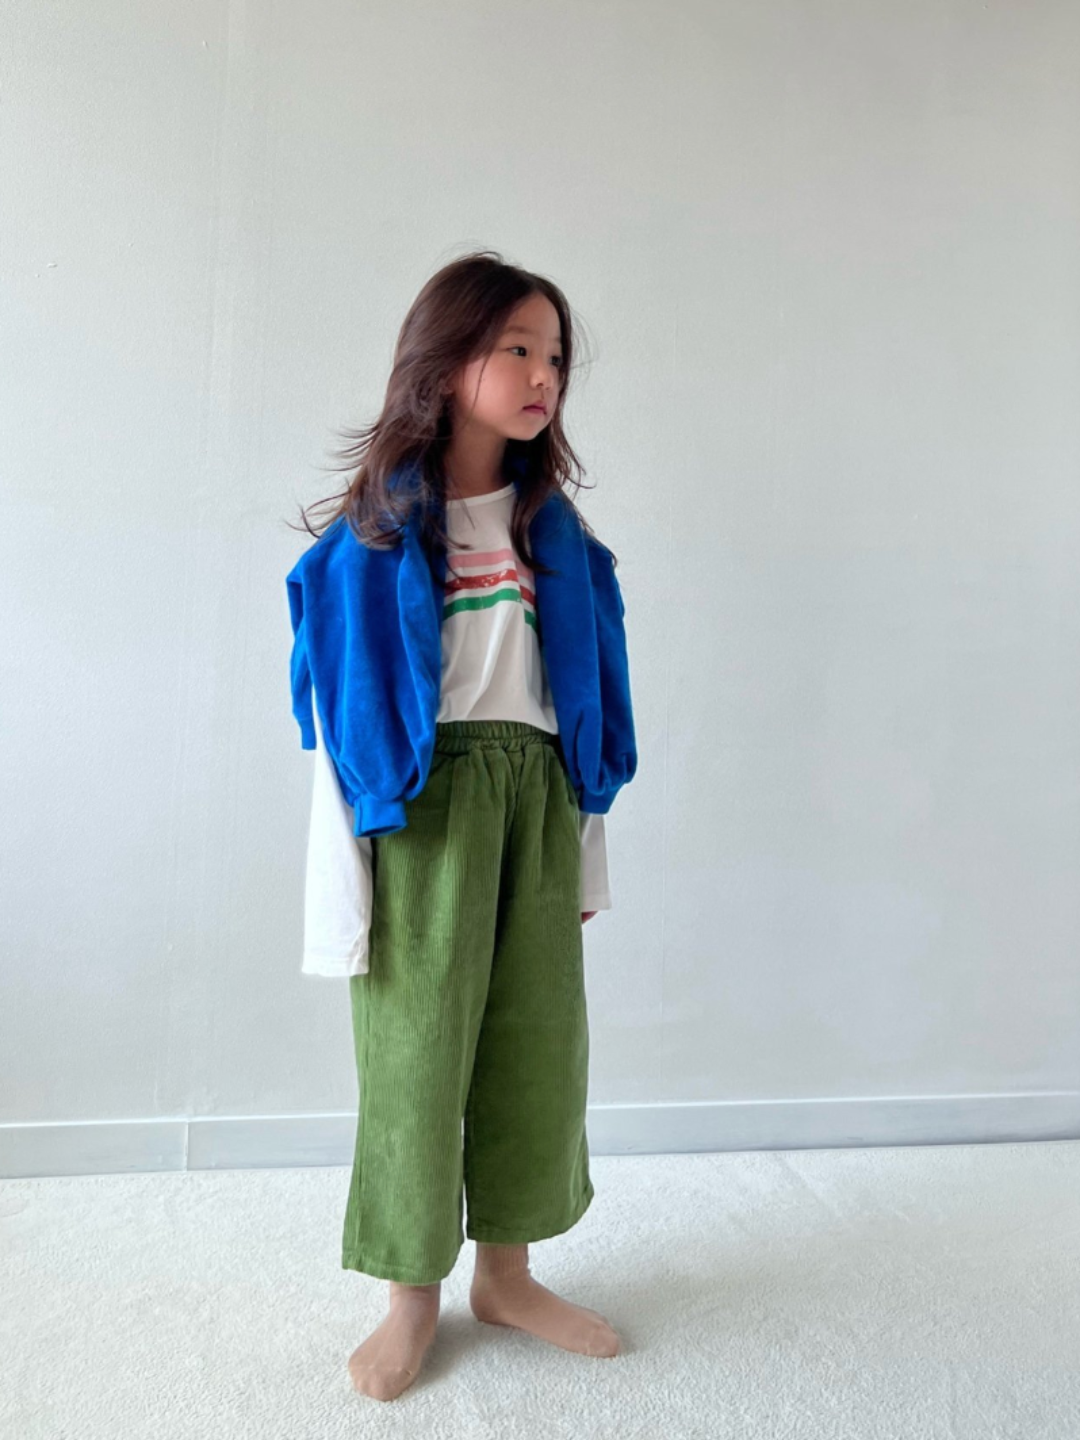 A girl wearing kids wide-leg corduroy pants in moss green, paired with a white t-shirt with three stripes in pink, red and green. A royal blue sweater is draped over her shoulders, and she is standing on grey carpet with a white wall behind her.